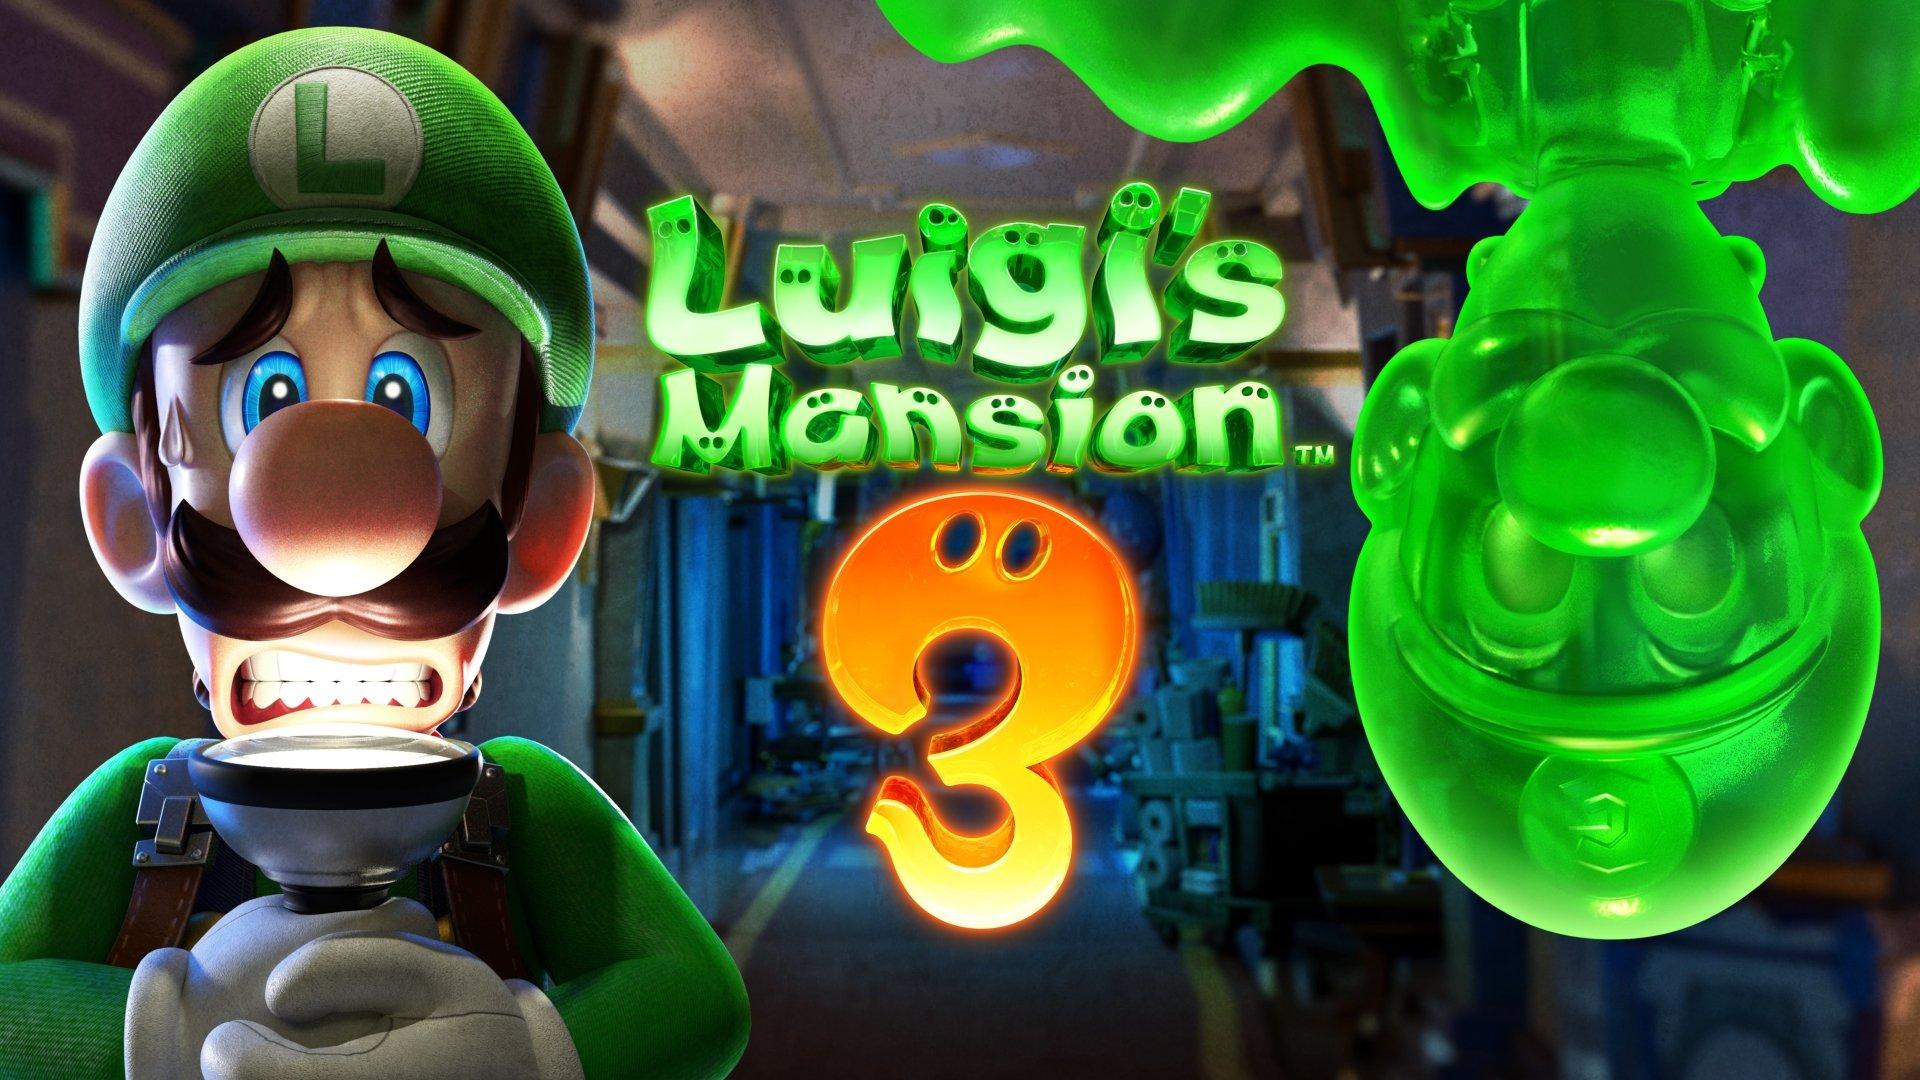 4K HD Luigi's Mansion 3 Wallpaper You Need to Make Your